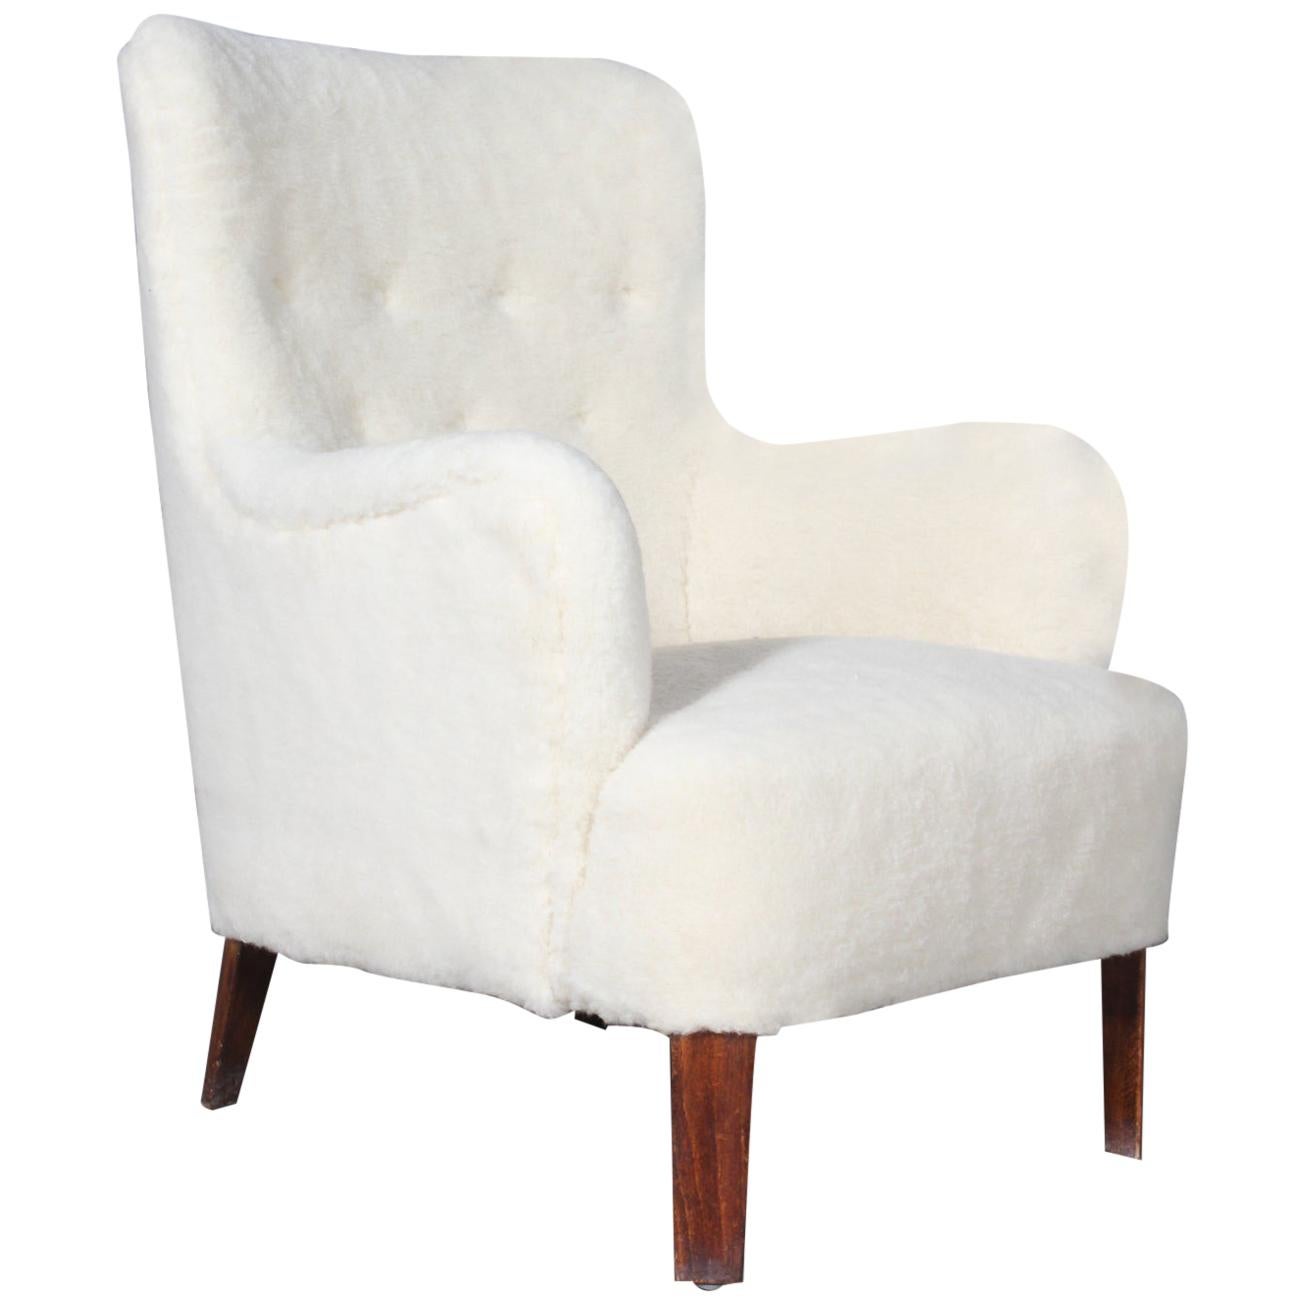 Peter Hvidt Early Lounge Chair in Sheepskin